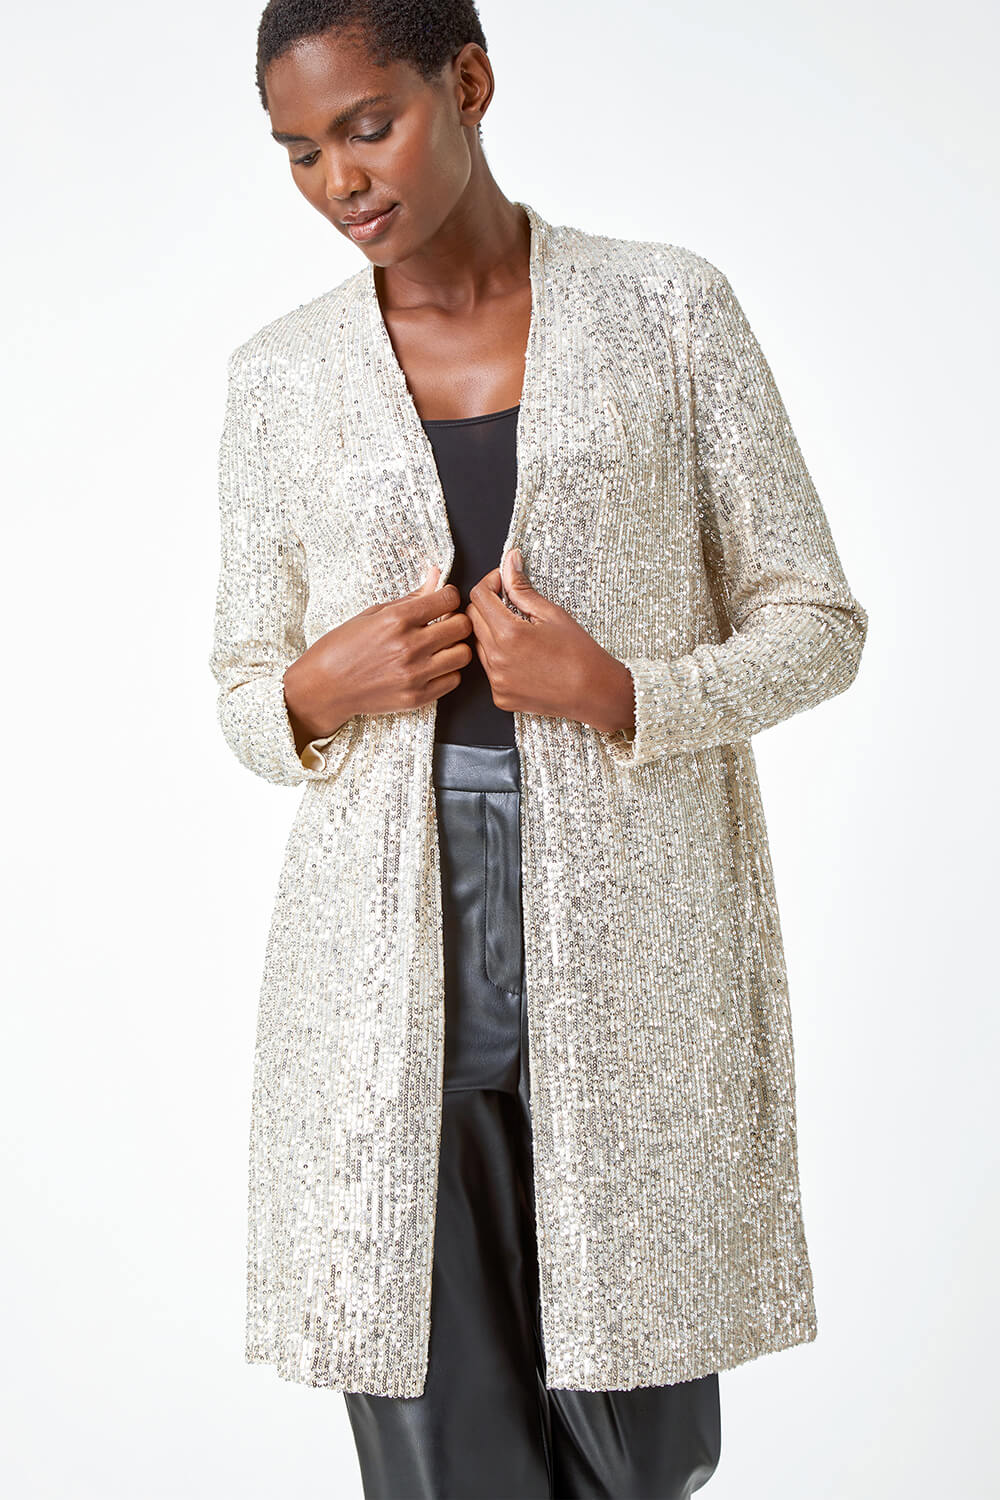 Silver Longline Sequin Stretch Jacket, Image 2 of 5